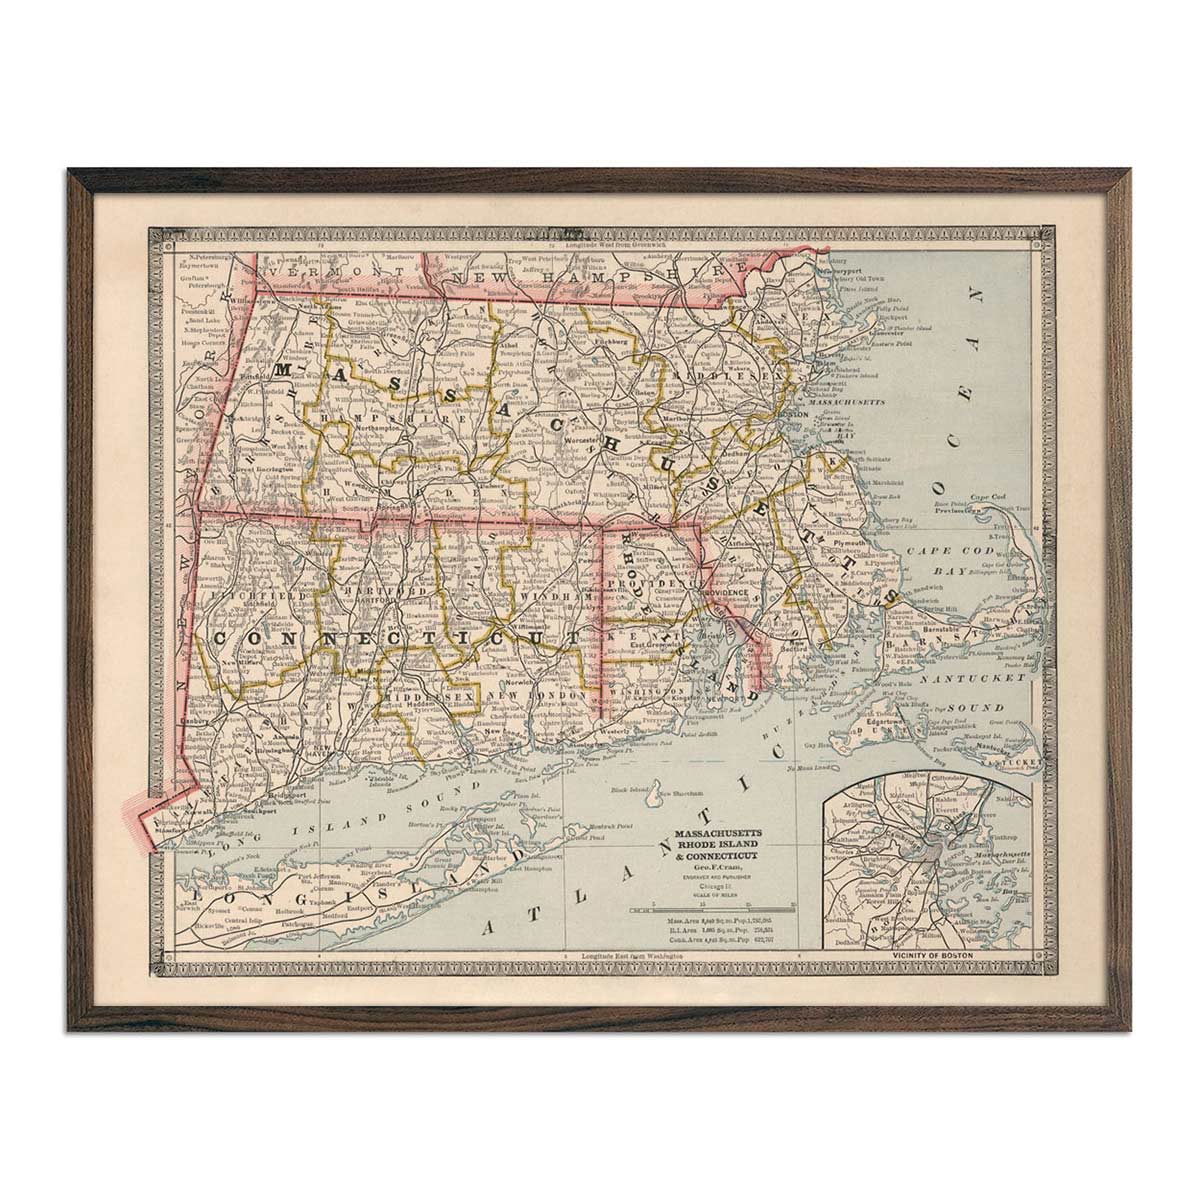 Vintage Map of Massachusetts, Rhode Island and Connecticut 1883